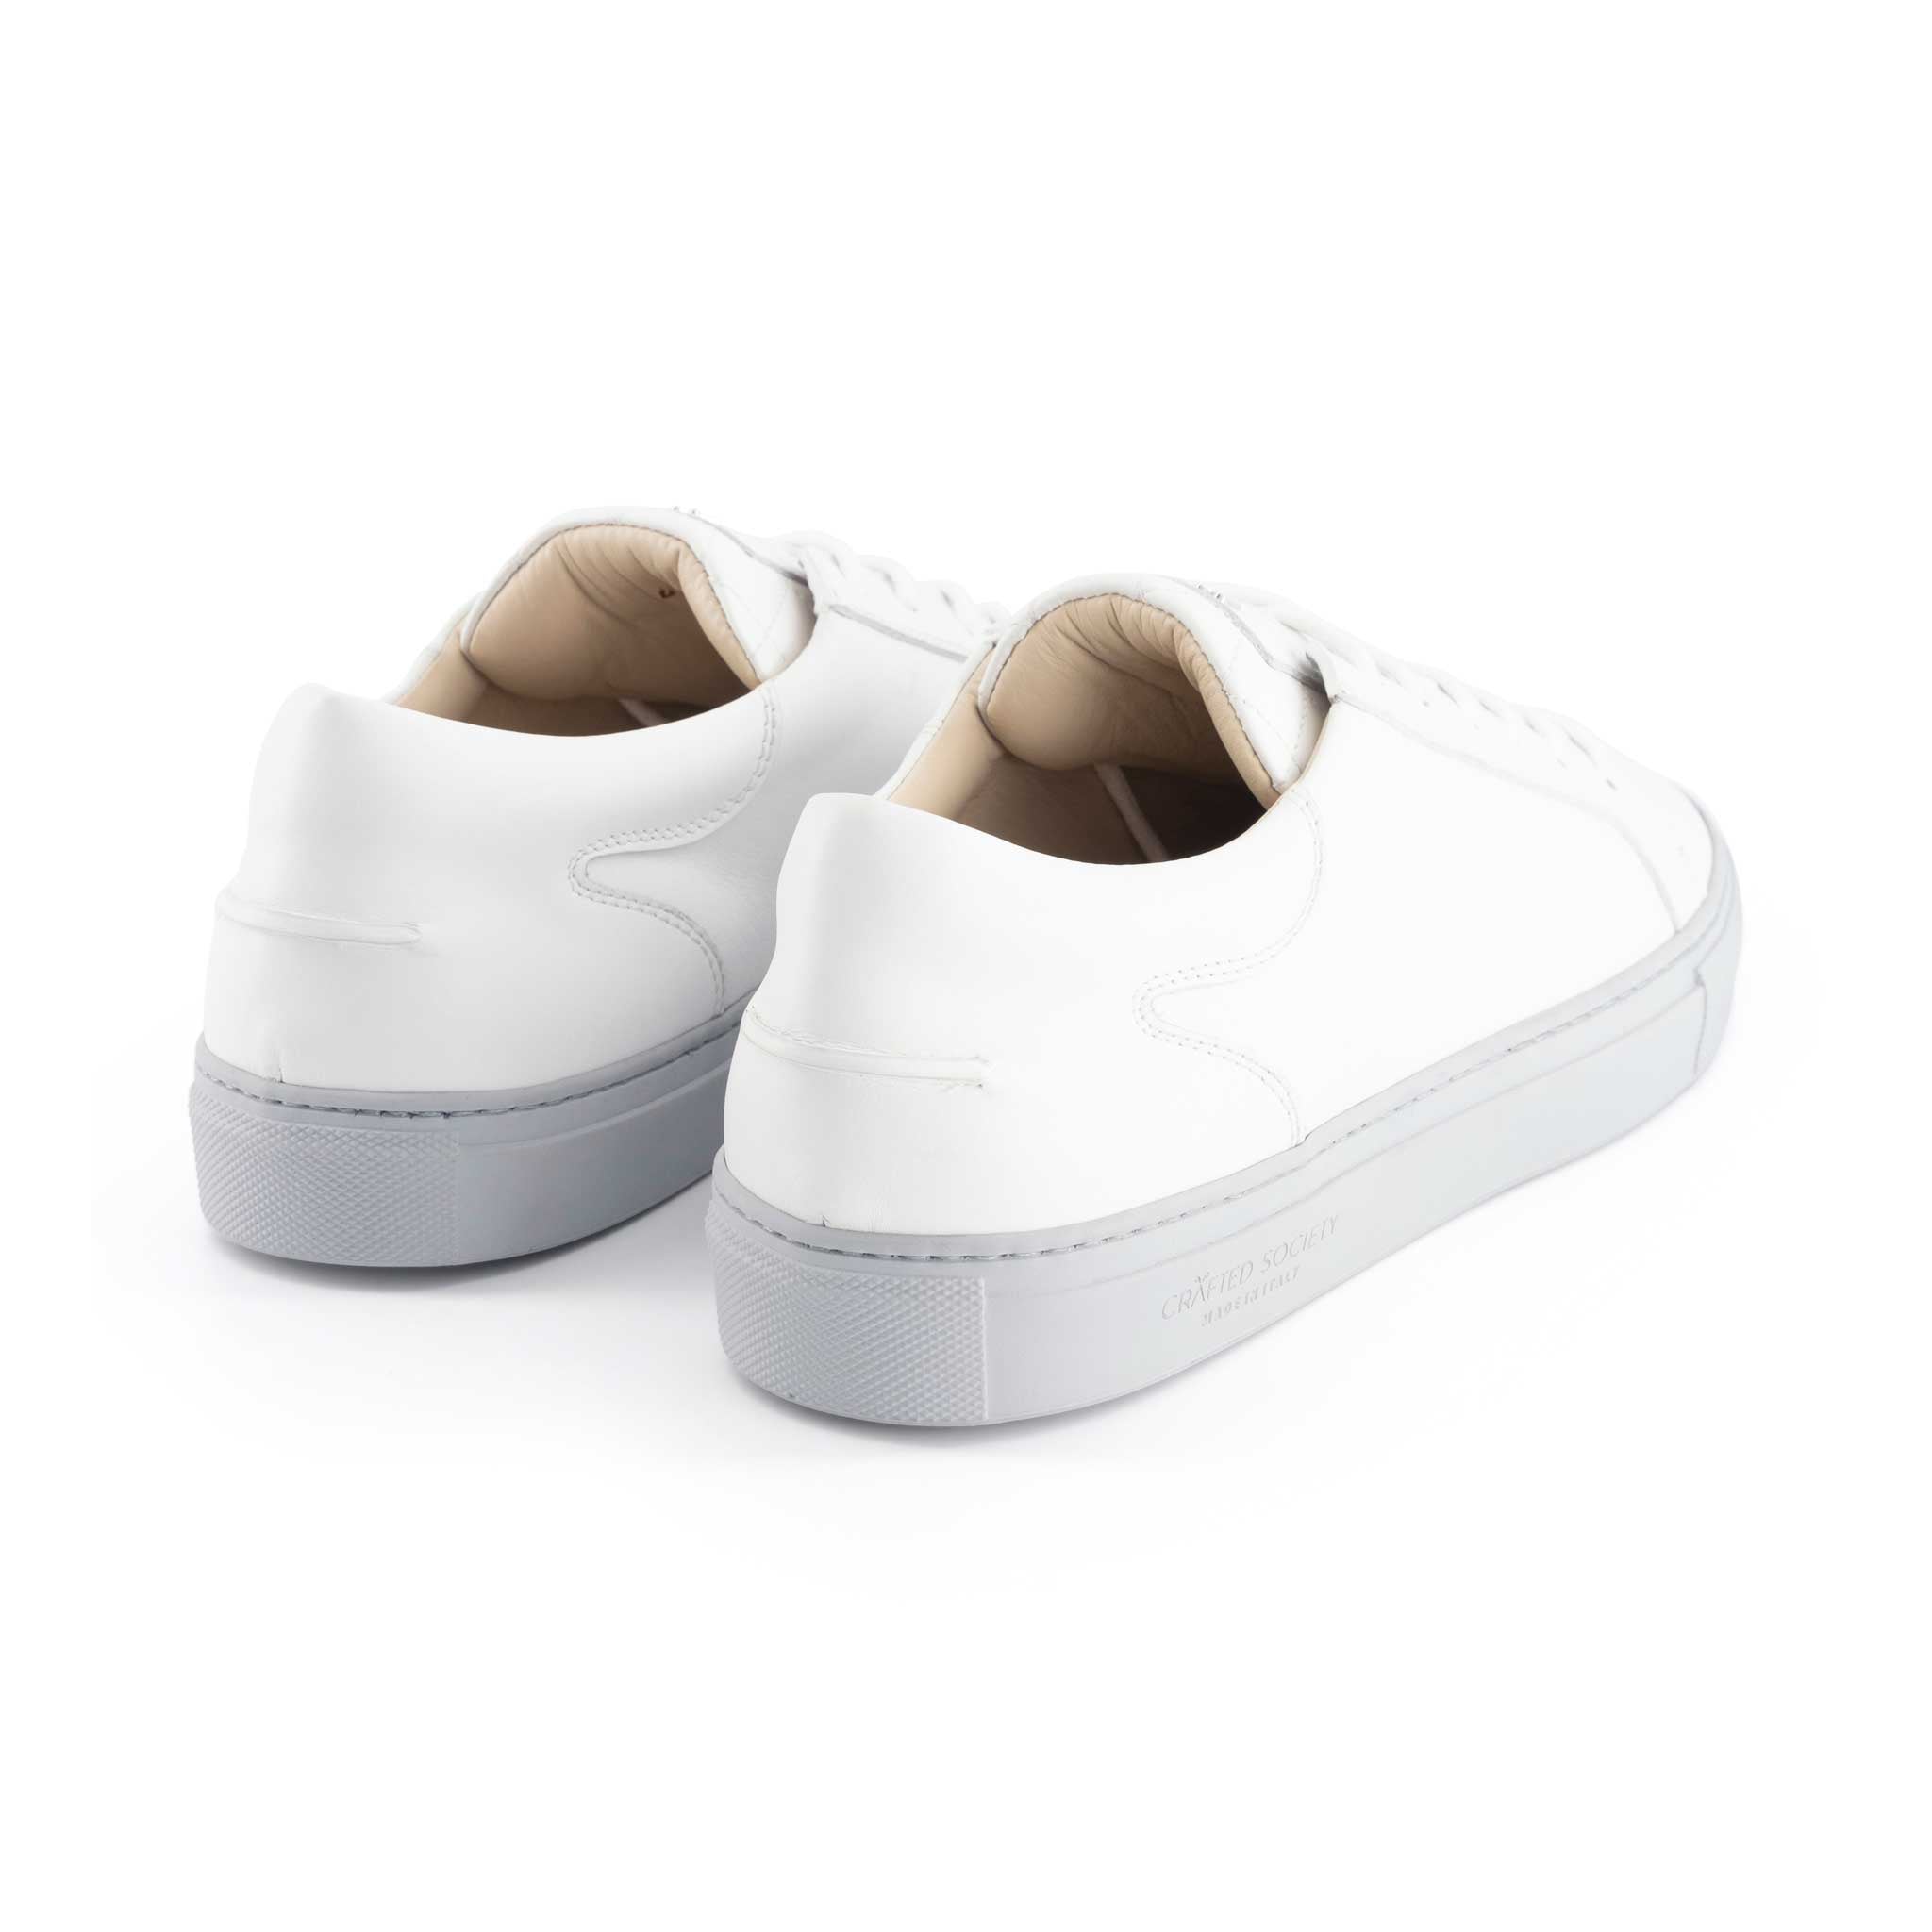 italian leather sneaker in white fullgrain leather with pearl grey outsole